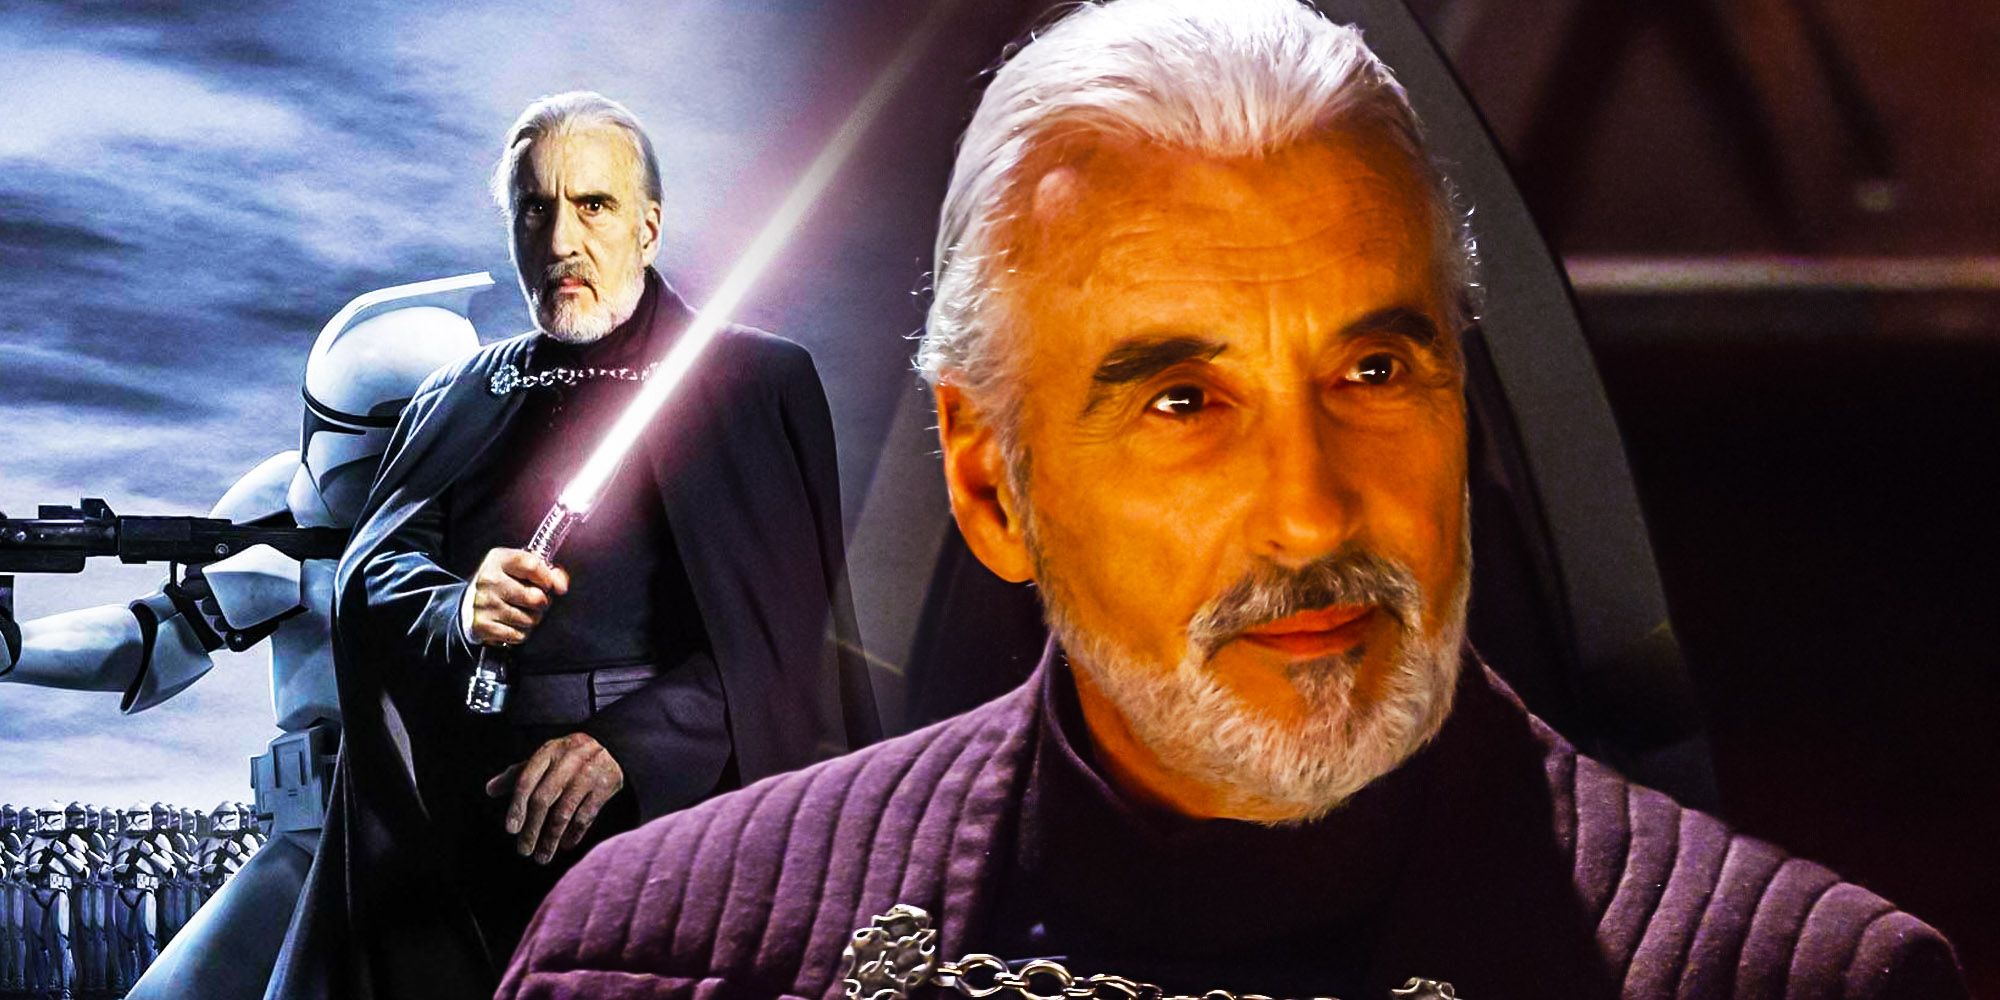 Why did Count Dooku not attend Qui-Gon's funeral? - Quora